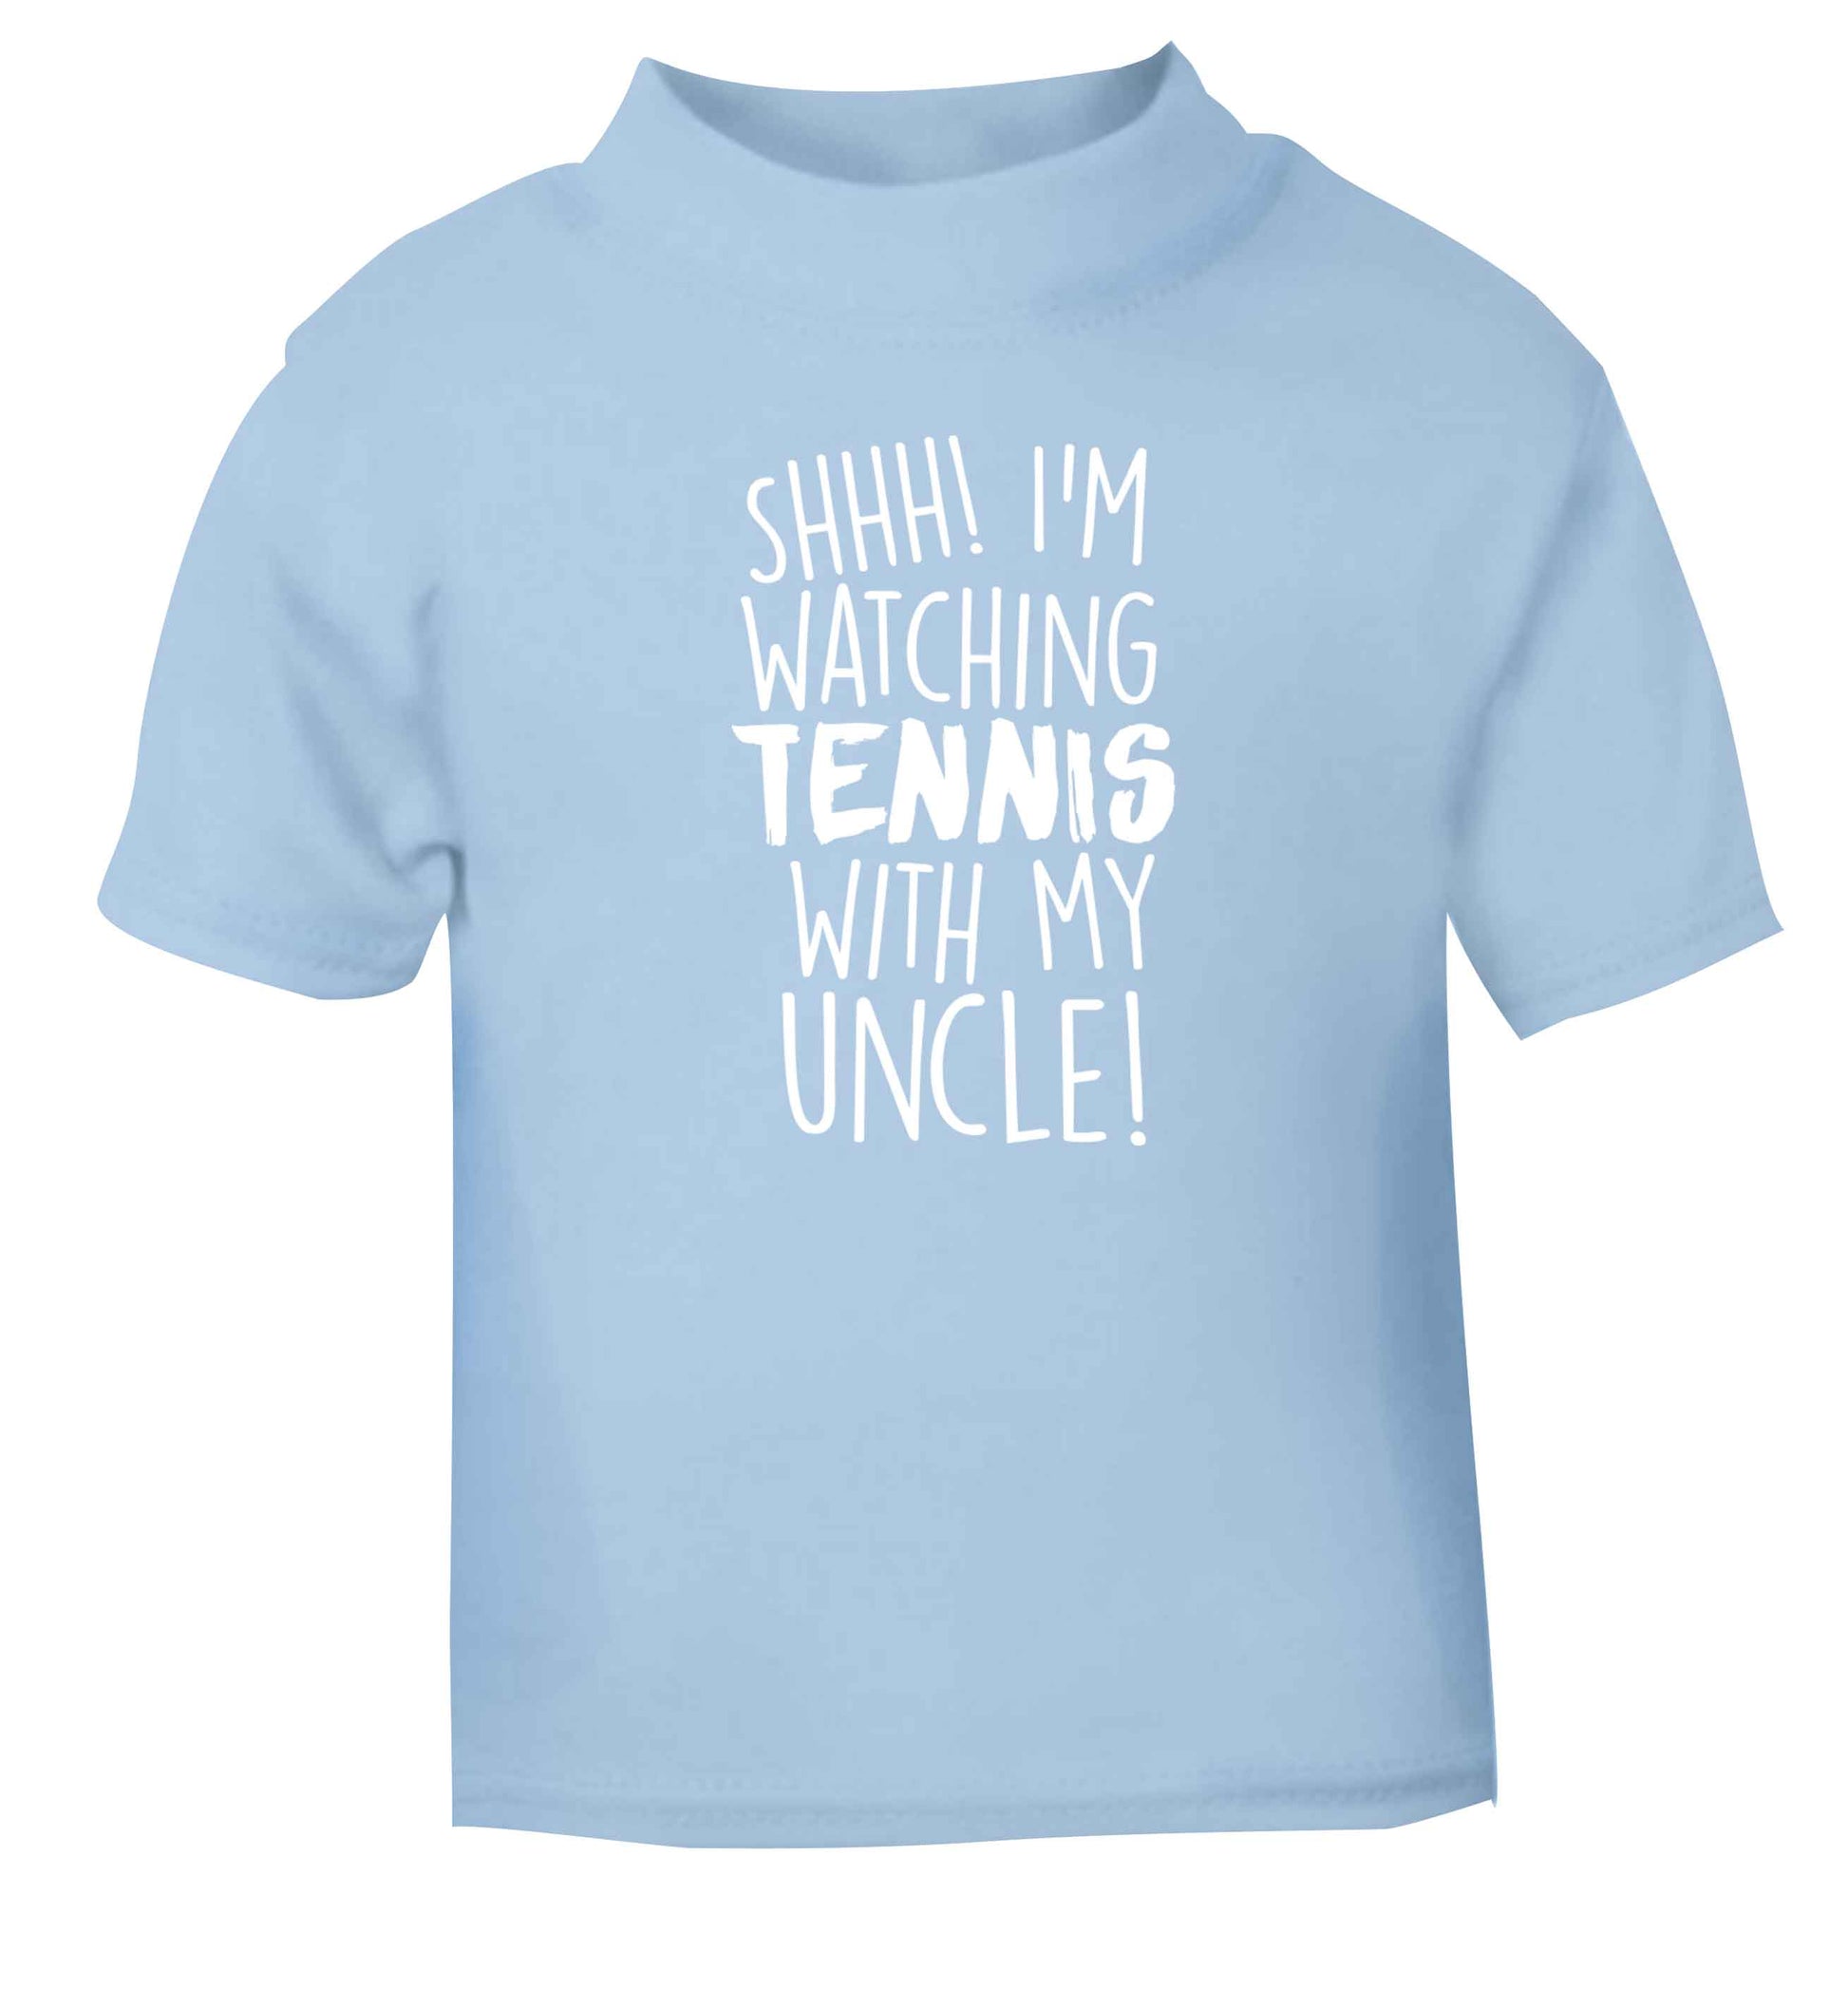 Shh! I'm watching tennis with my uncle! light blue Baby Toddler Tshirt 2 Years